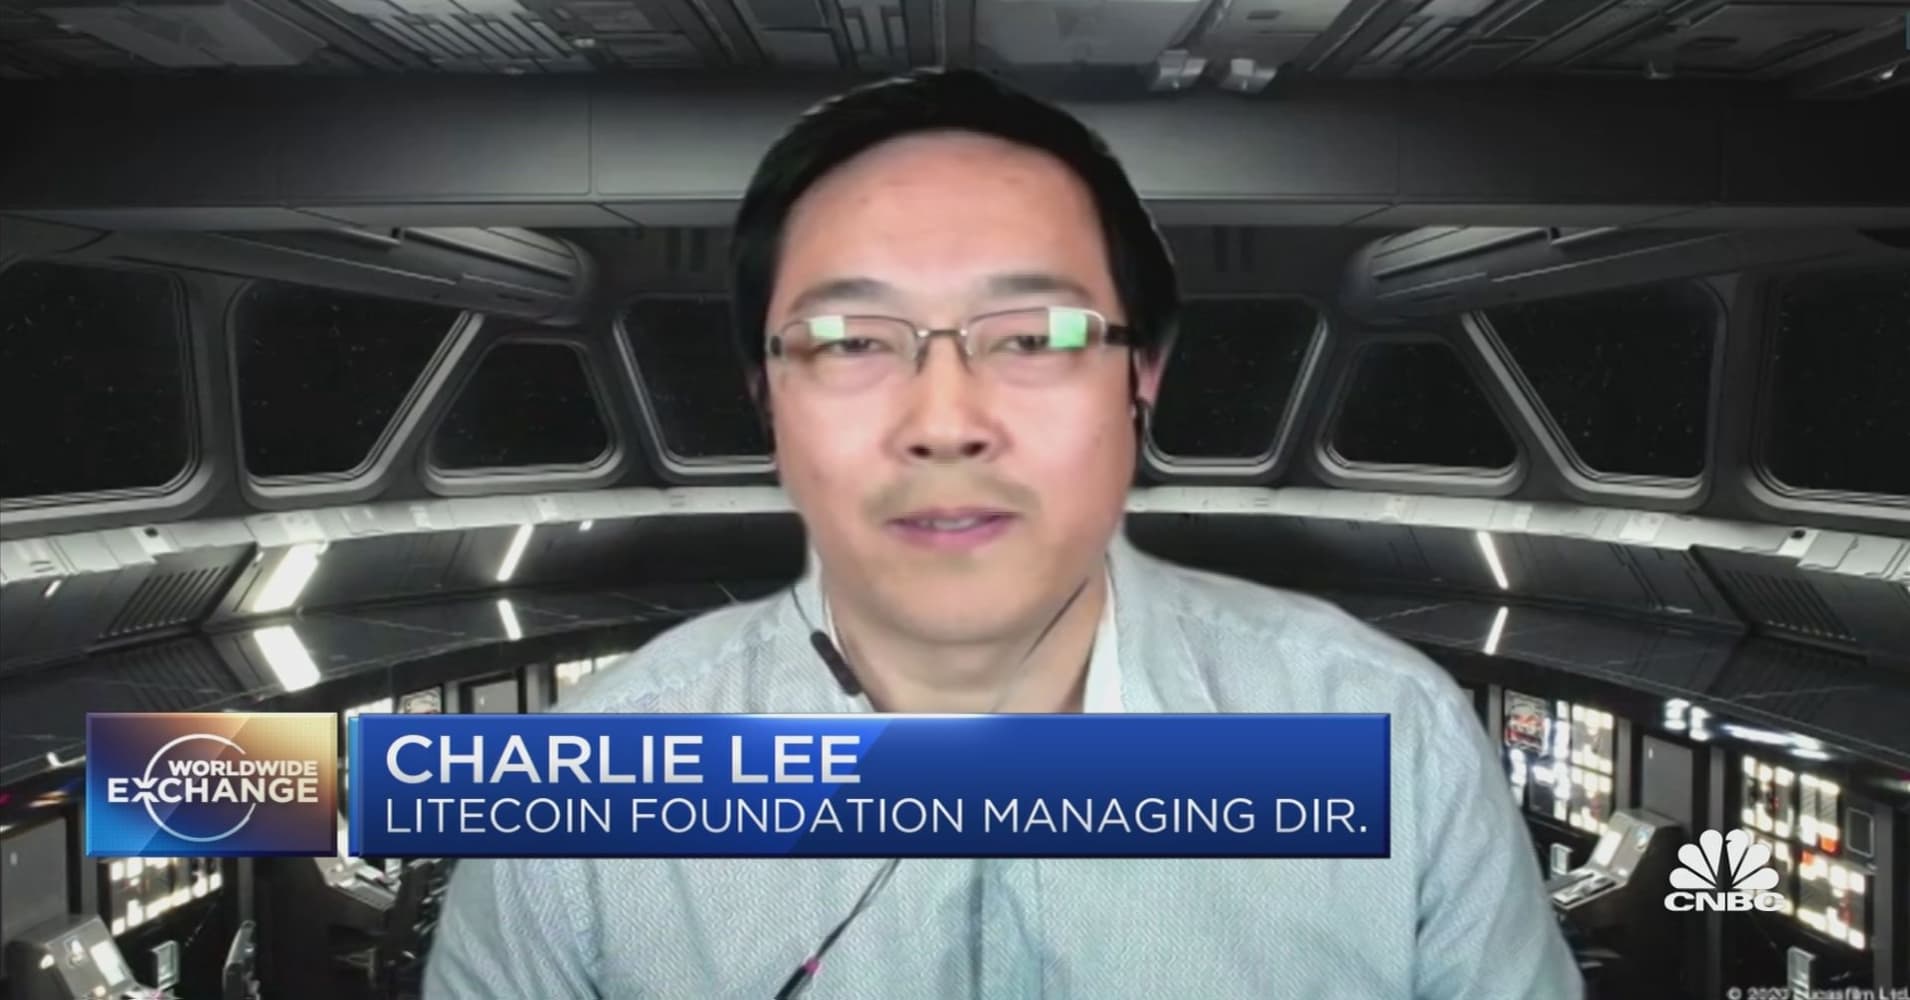 Litecoin creator Charlie Lee on navigating the cryptocurrency space today